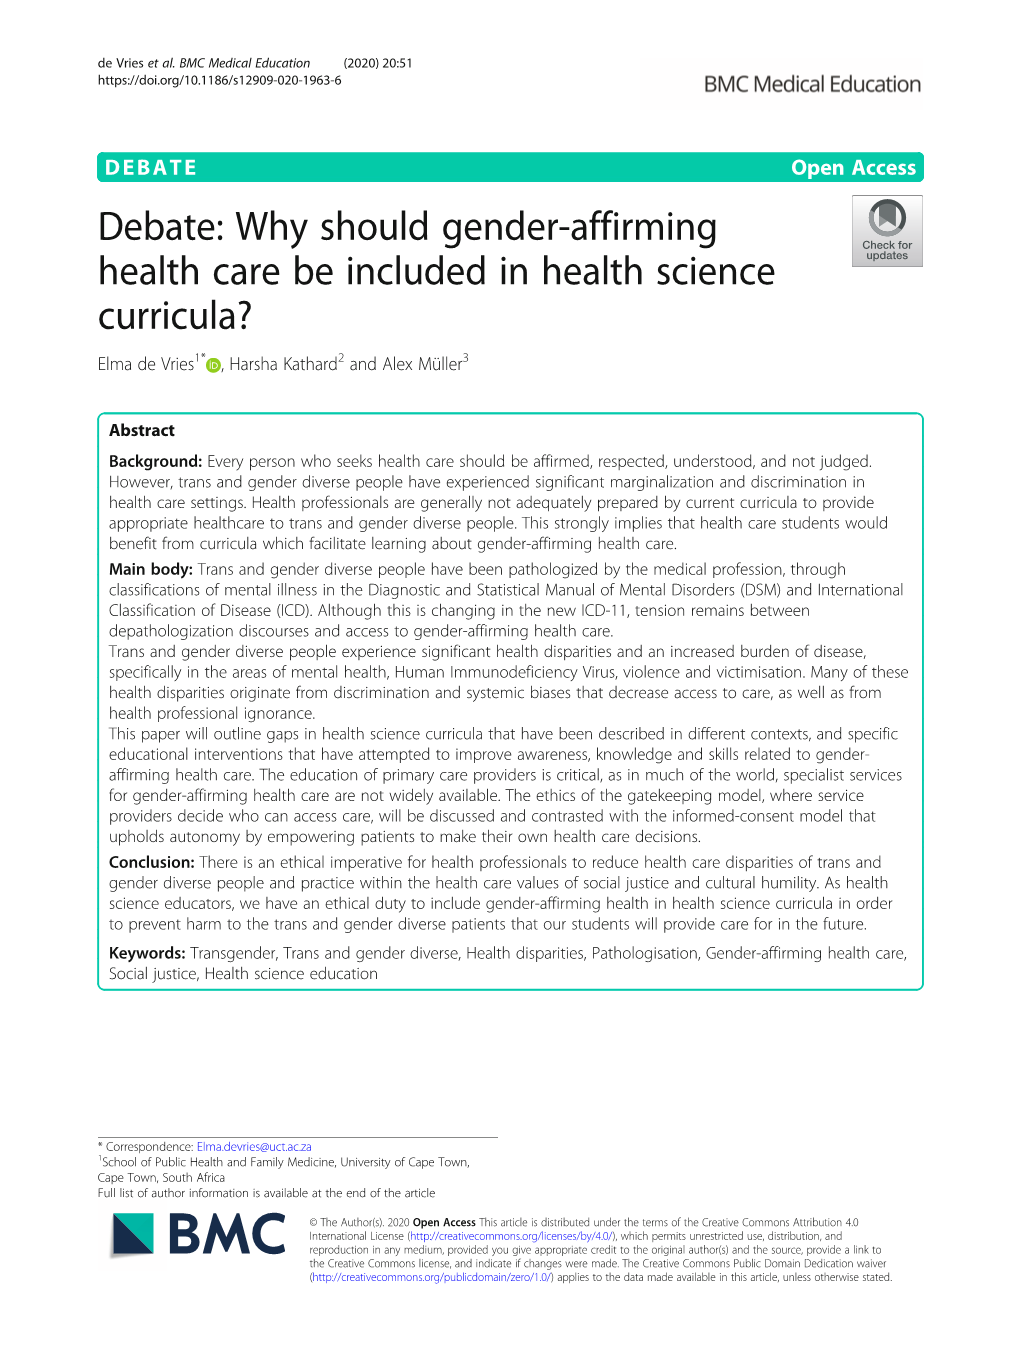 Why Should Gender-Affirming Health Care Be Included in Health Science Curricula? Elma De Vries1* , Harsha Kathard2 and Alex Müller3